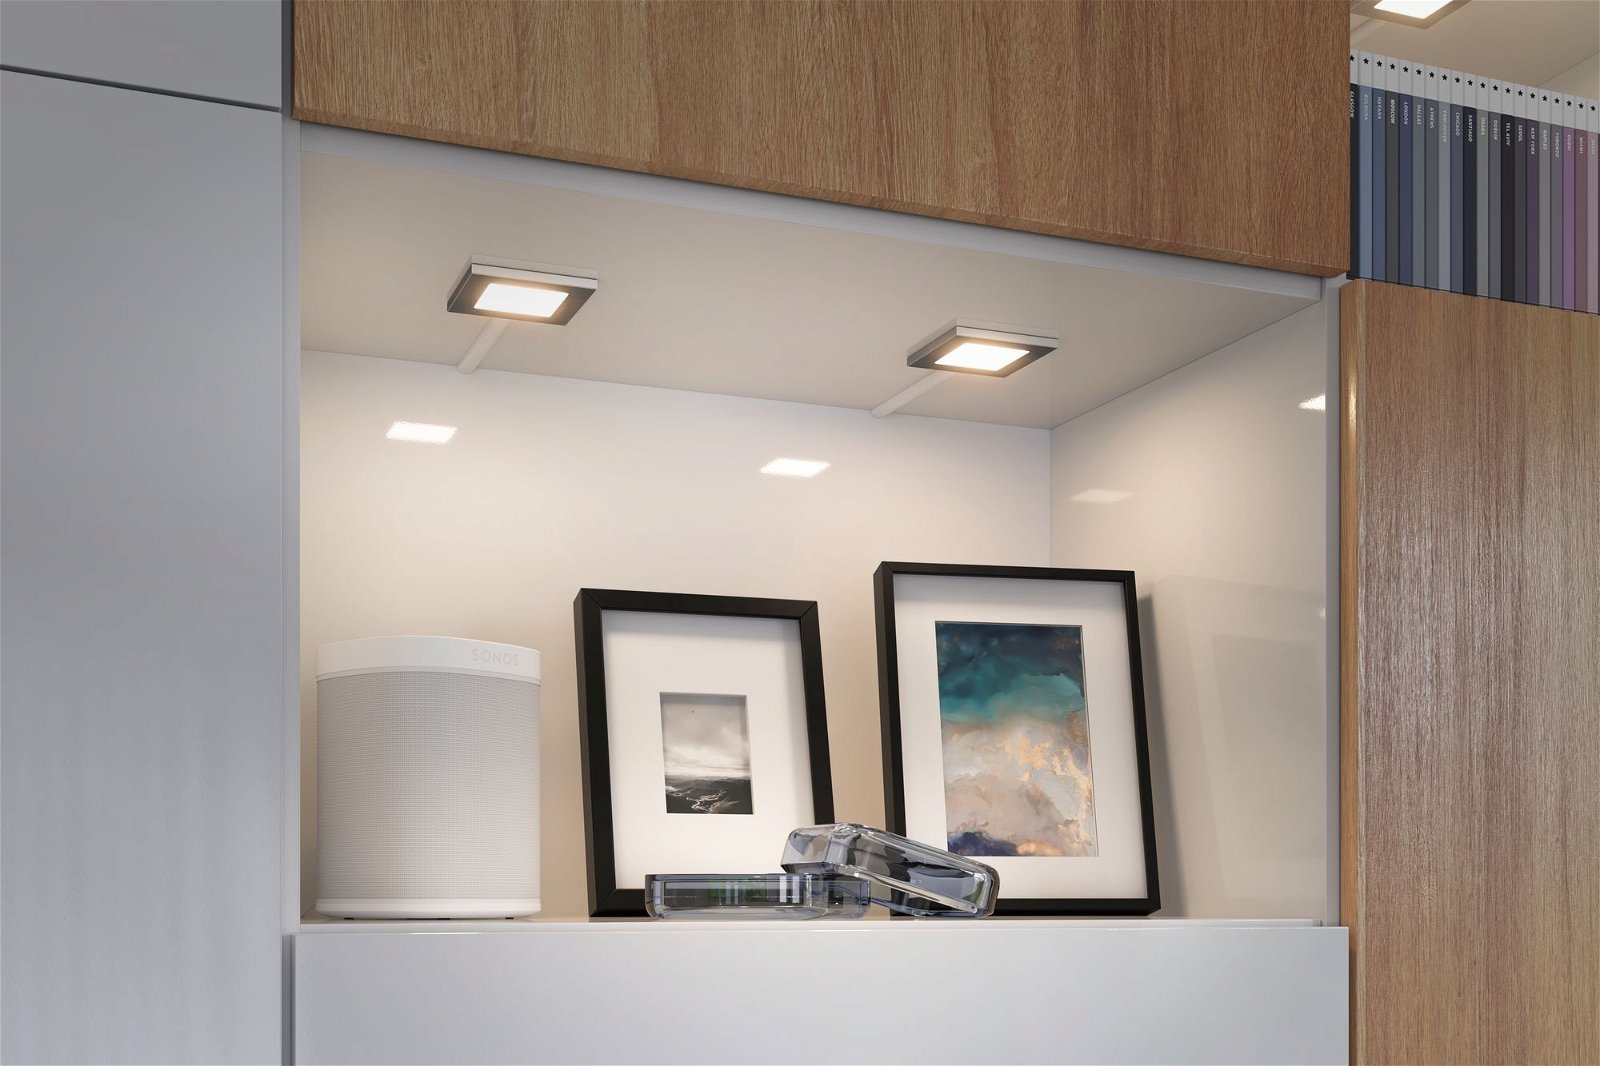 Clever Connect Spot LED Pola Tunable White 2,5W Chrome mat